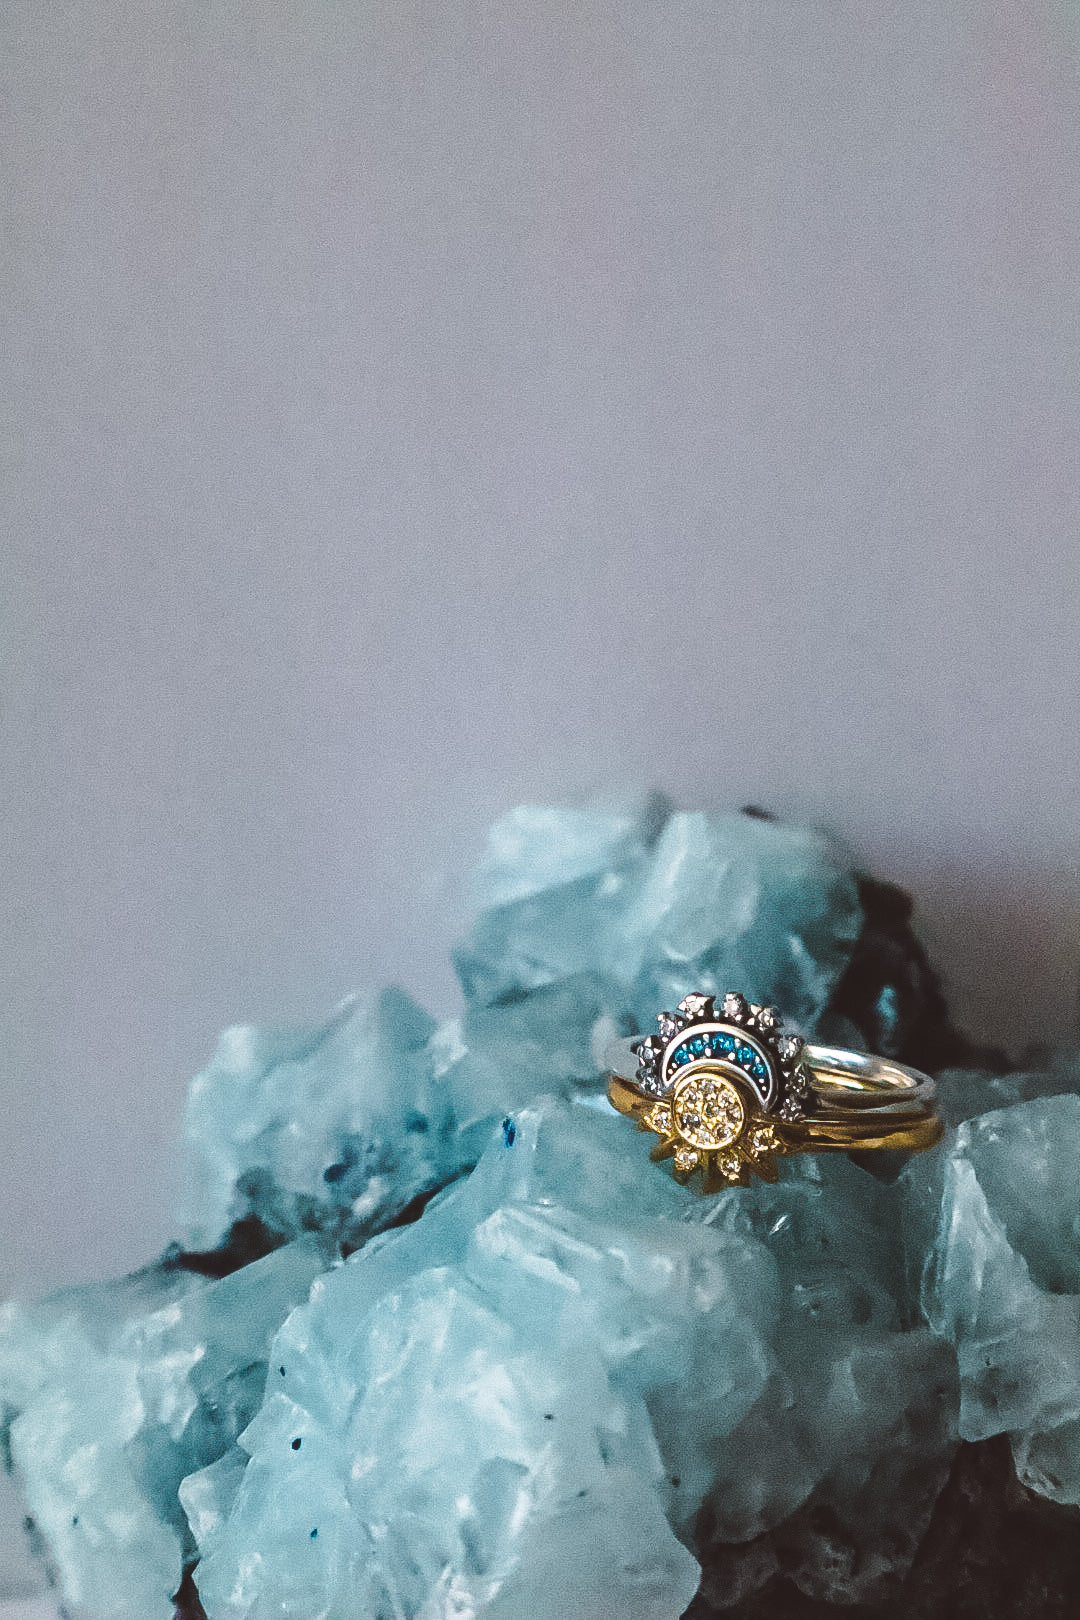 INFINITE Sun and Moon Rings - Gold 925 Silver